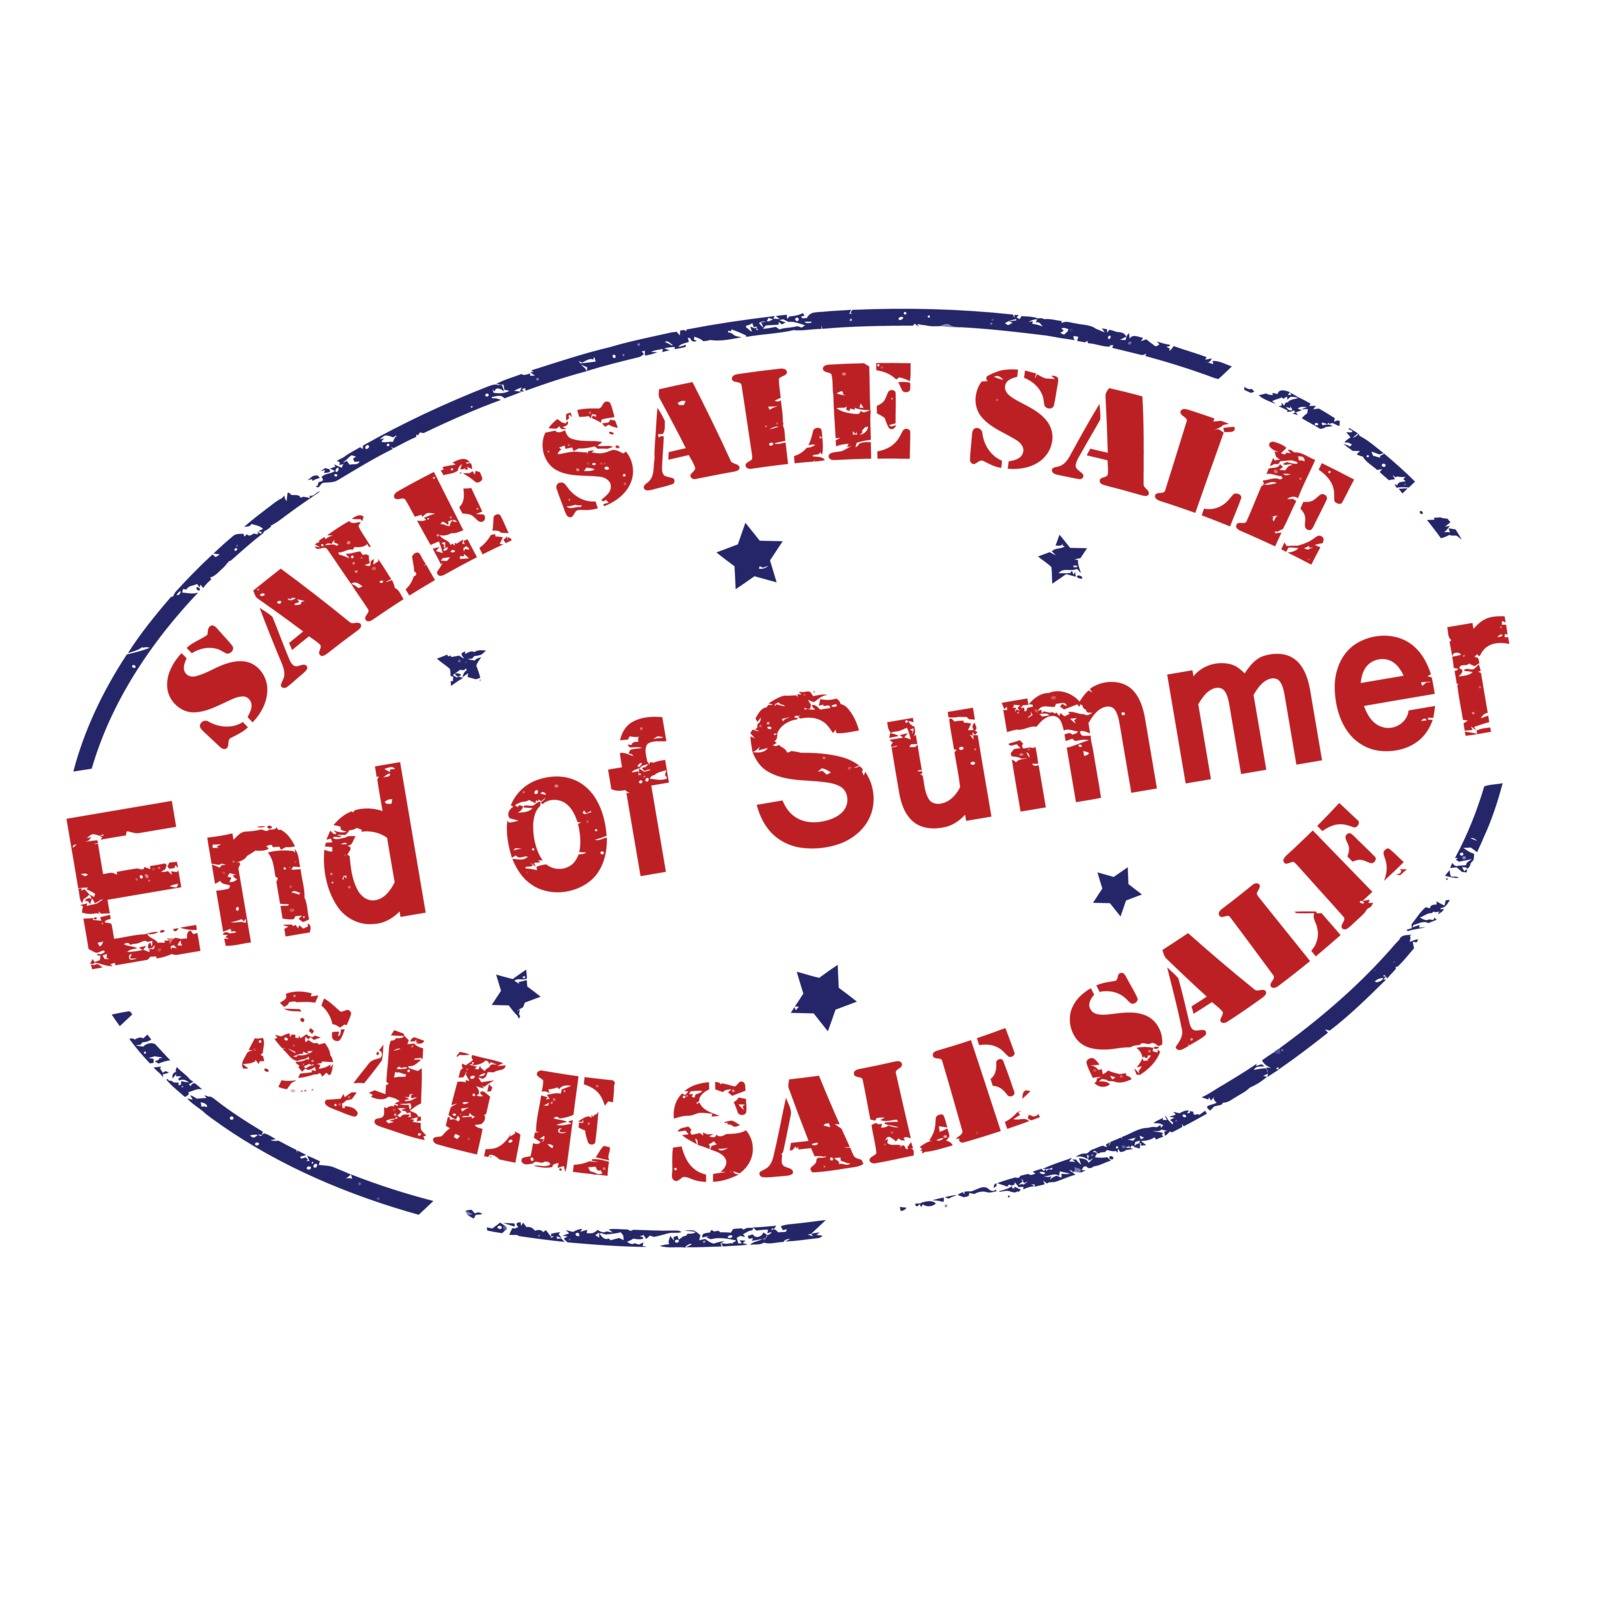 Rubber stamp with text sale end of Summer inside, vector illustration